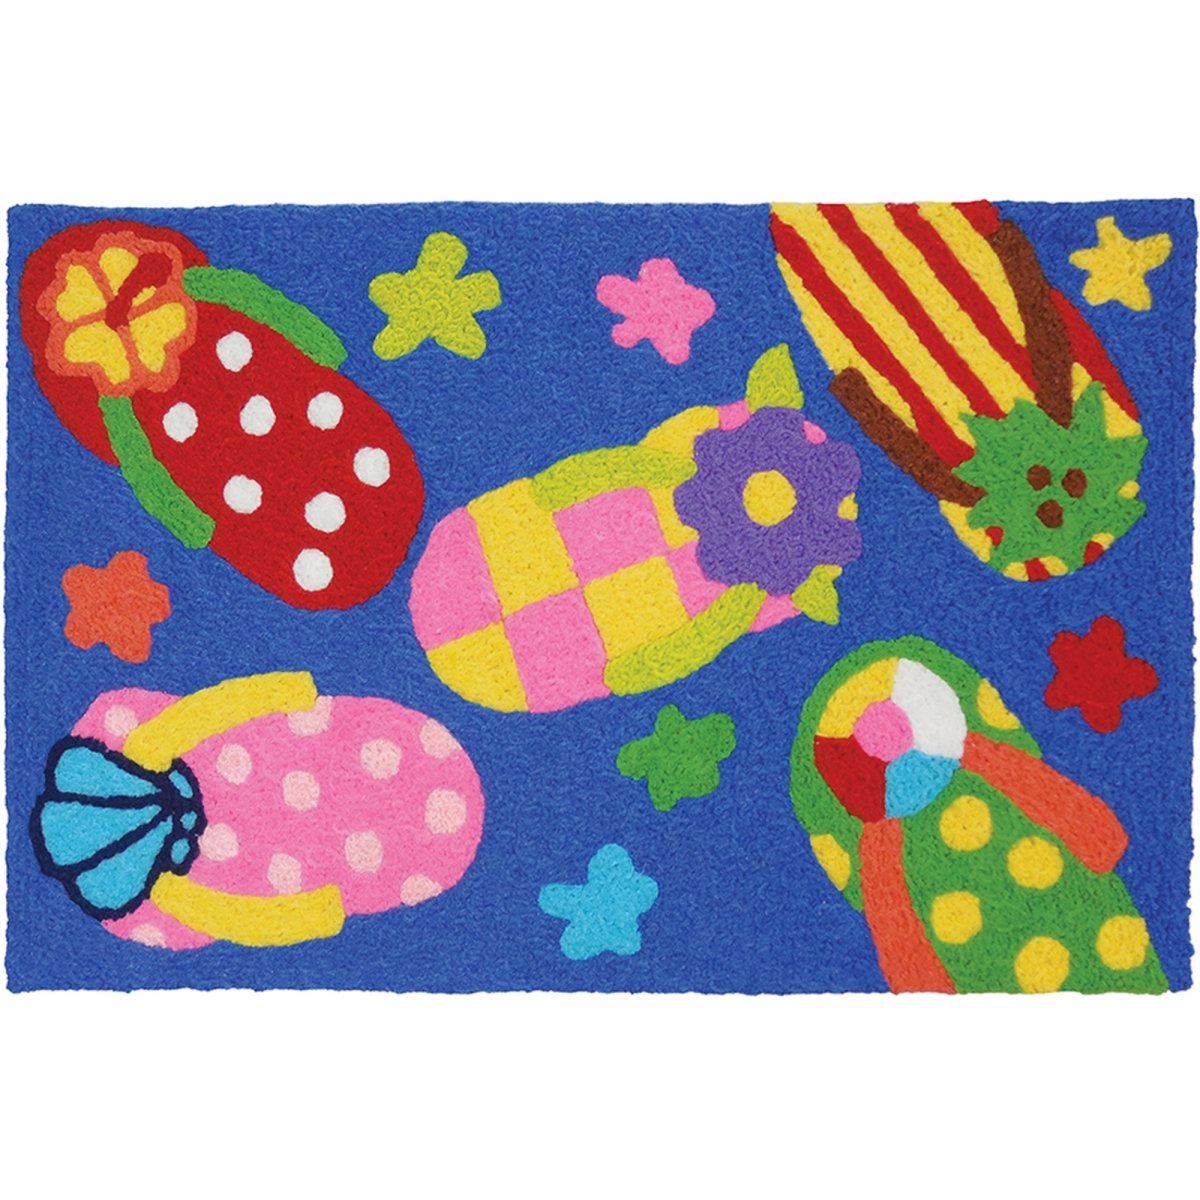 Jb-ce034 20 X 30 In. Party Sandals Rug